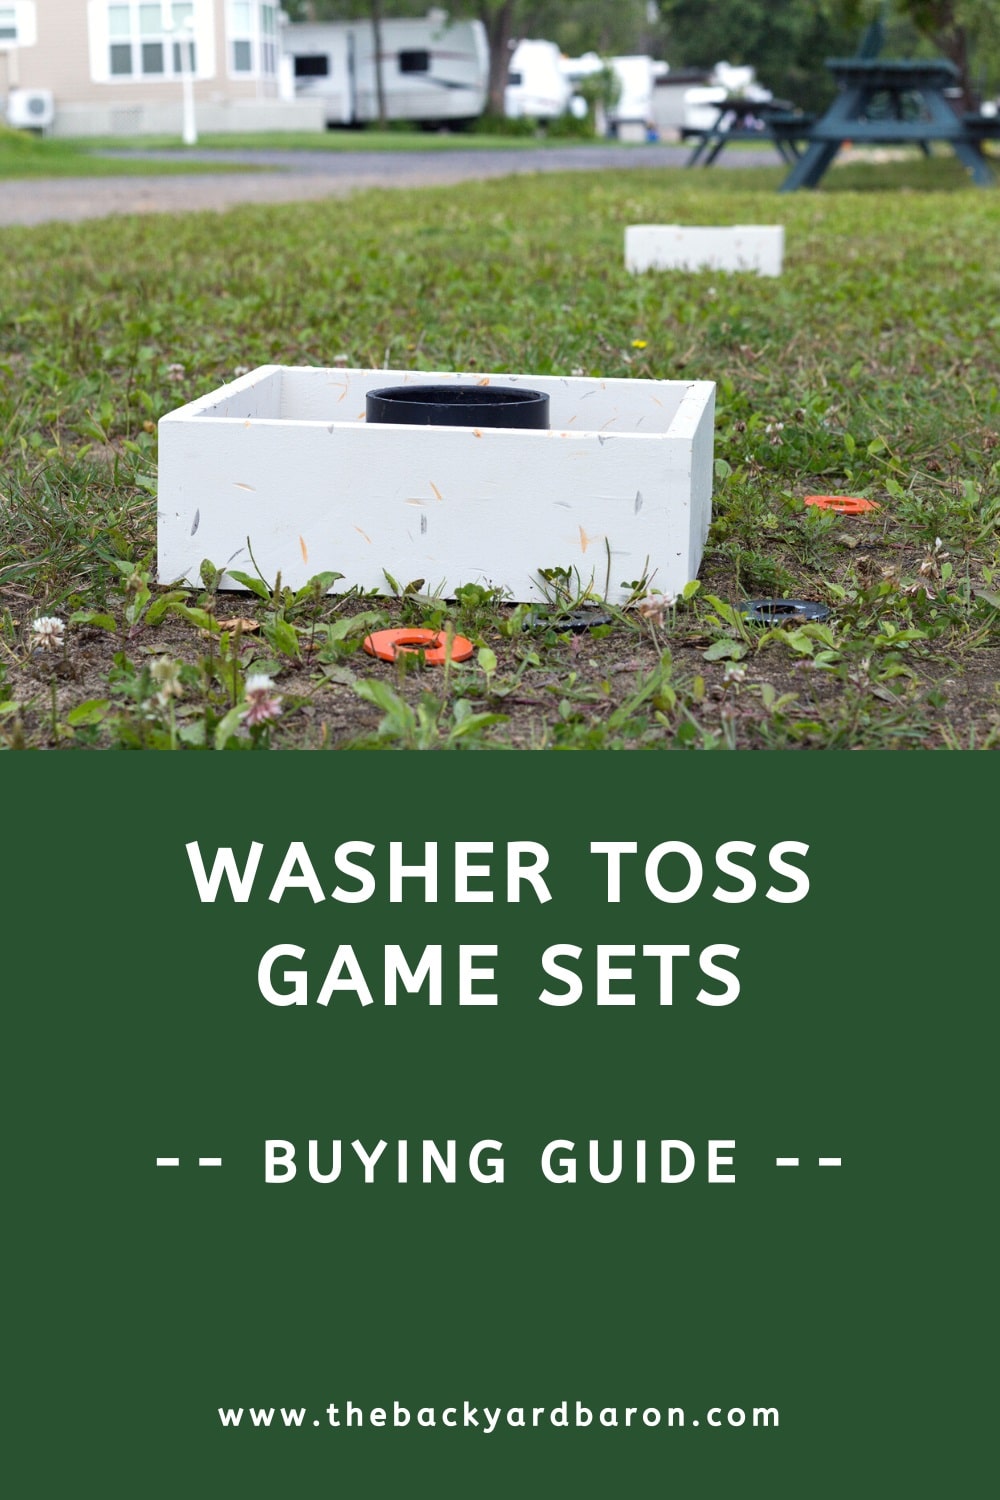 Washer toss set buying guide